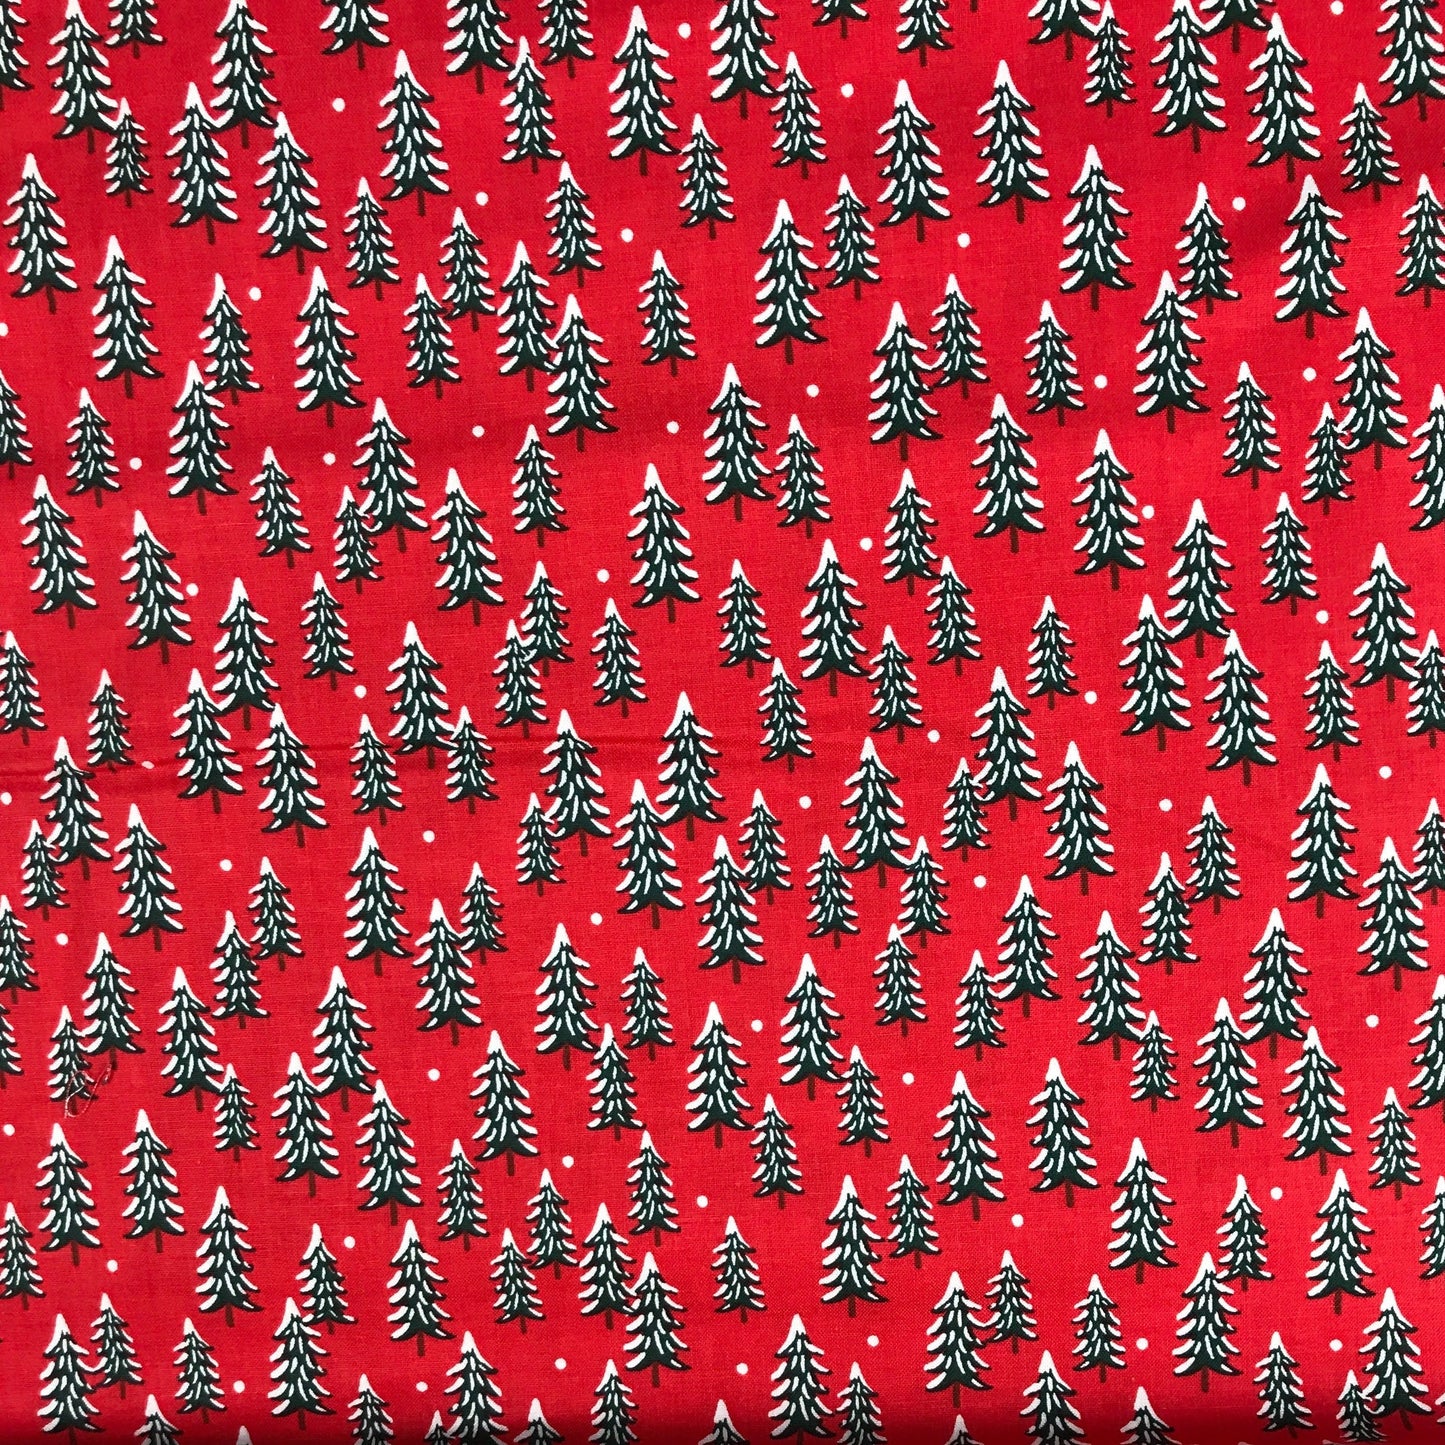 Rifle Paper Co Holiday Classics Fur Trees Red Silver Metallic Fabric Fetish